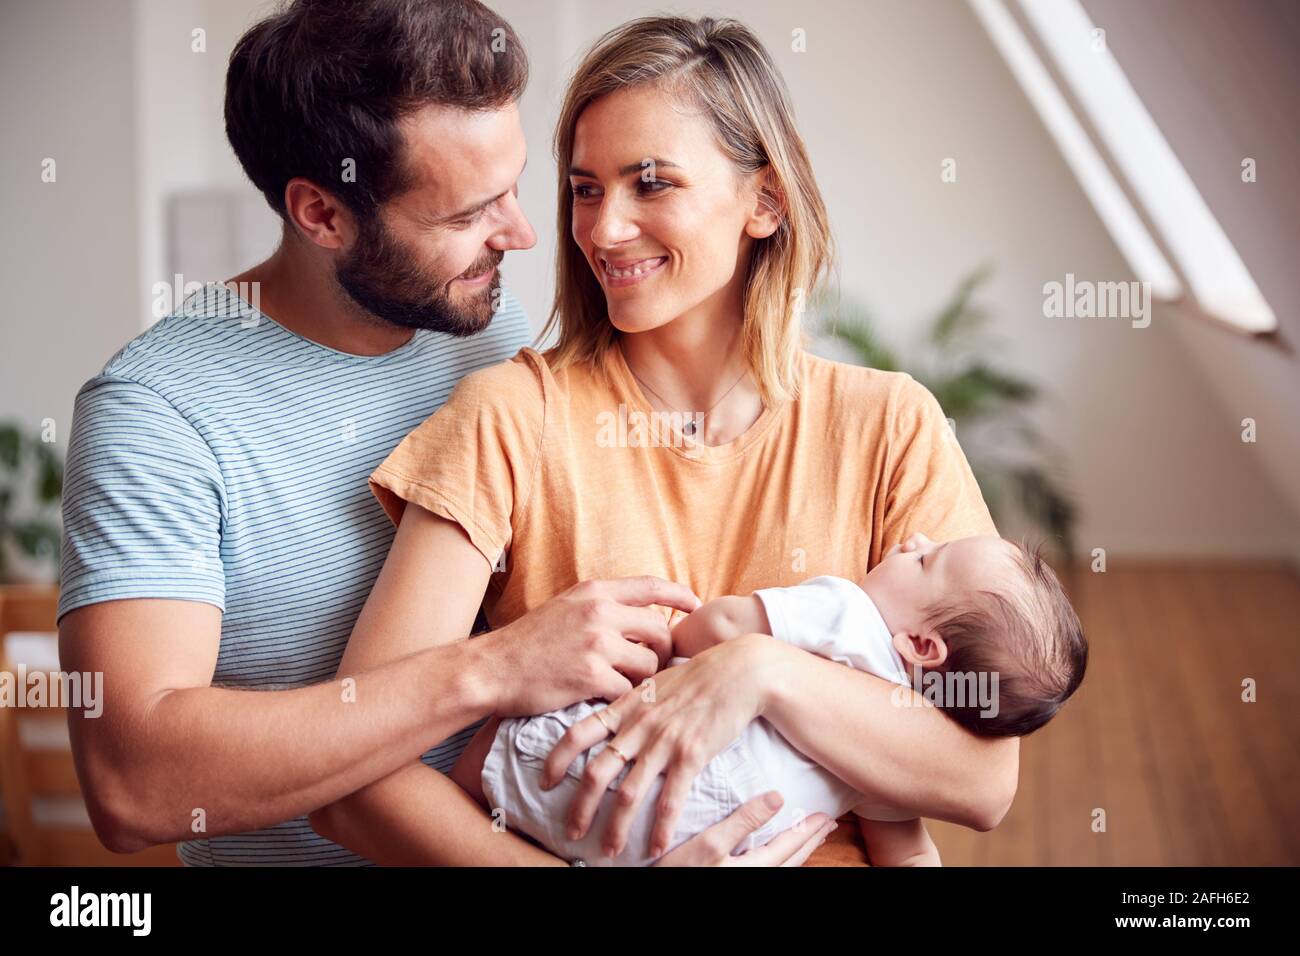 Loving Parents Holding Newborn Baby At Home In Loft Apartment Stock Photo